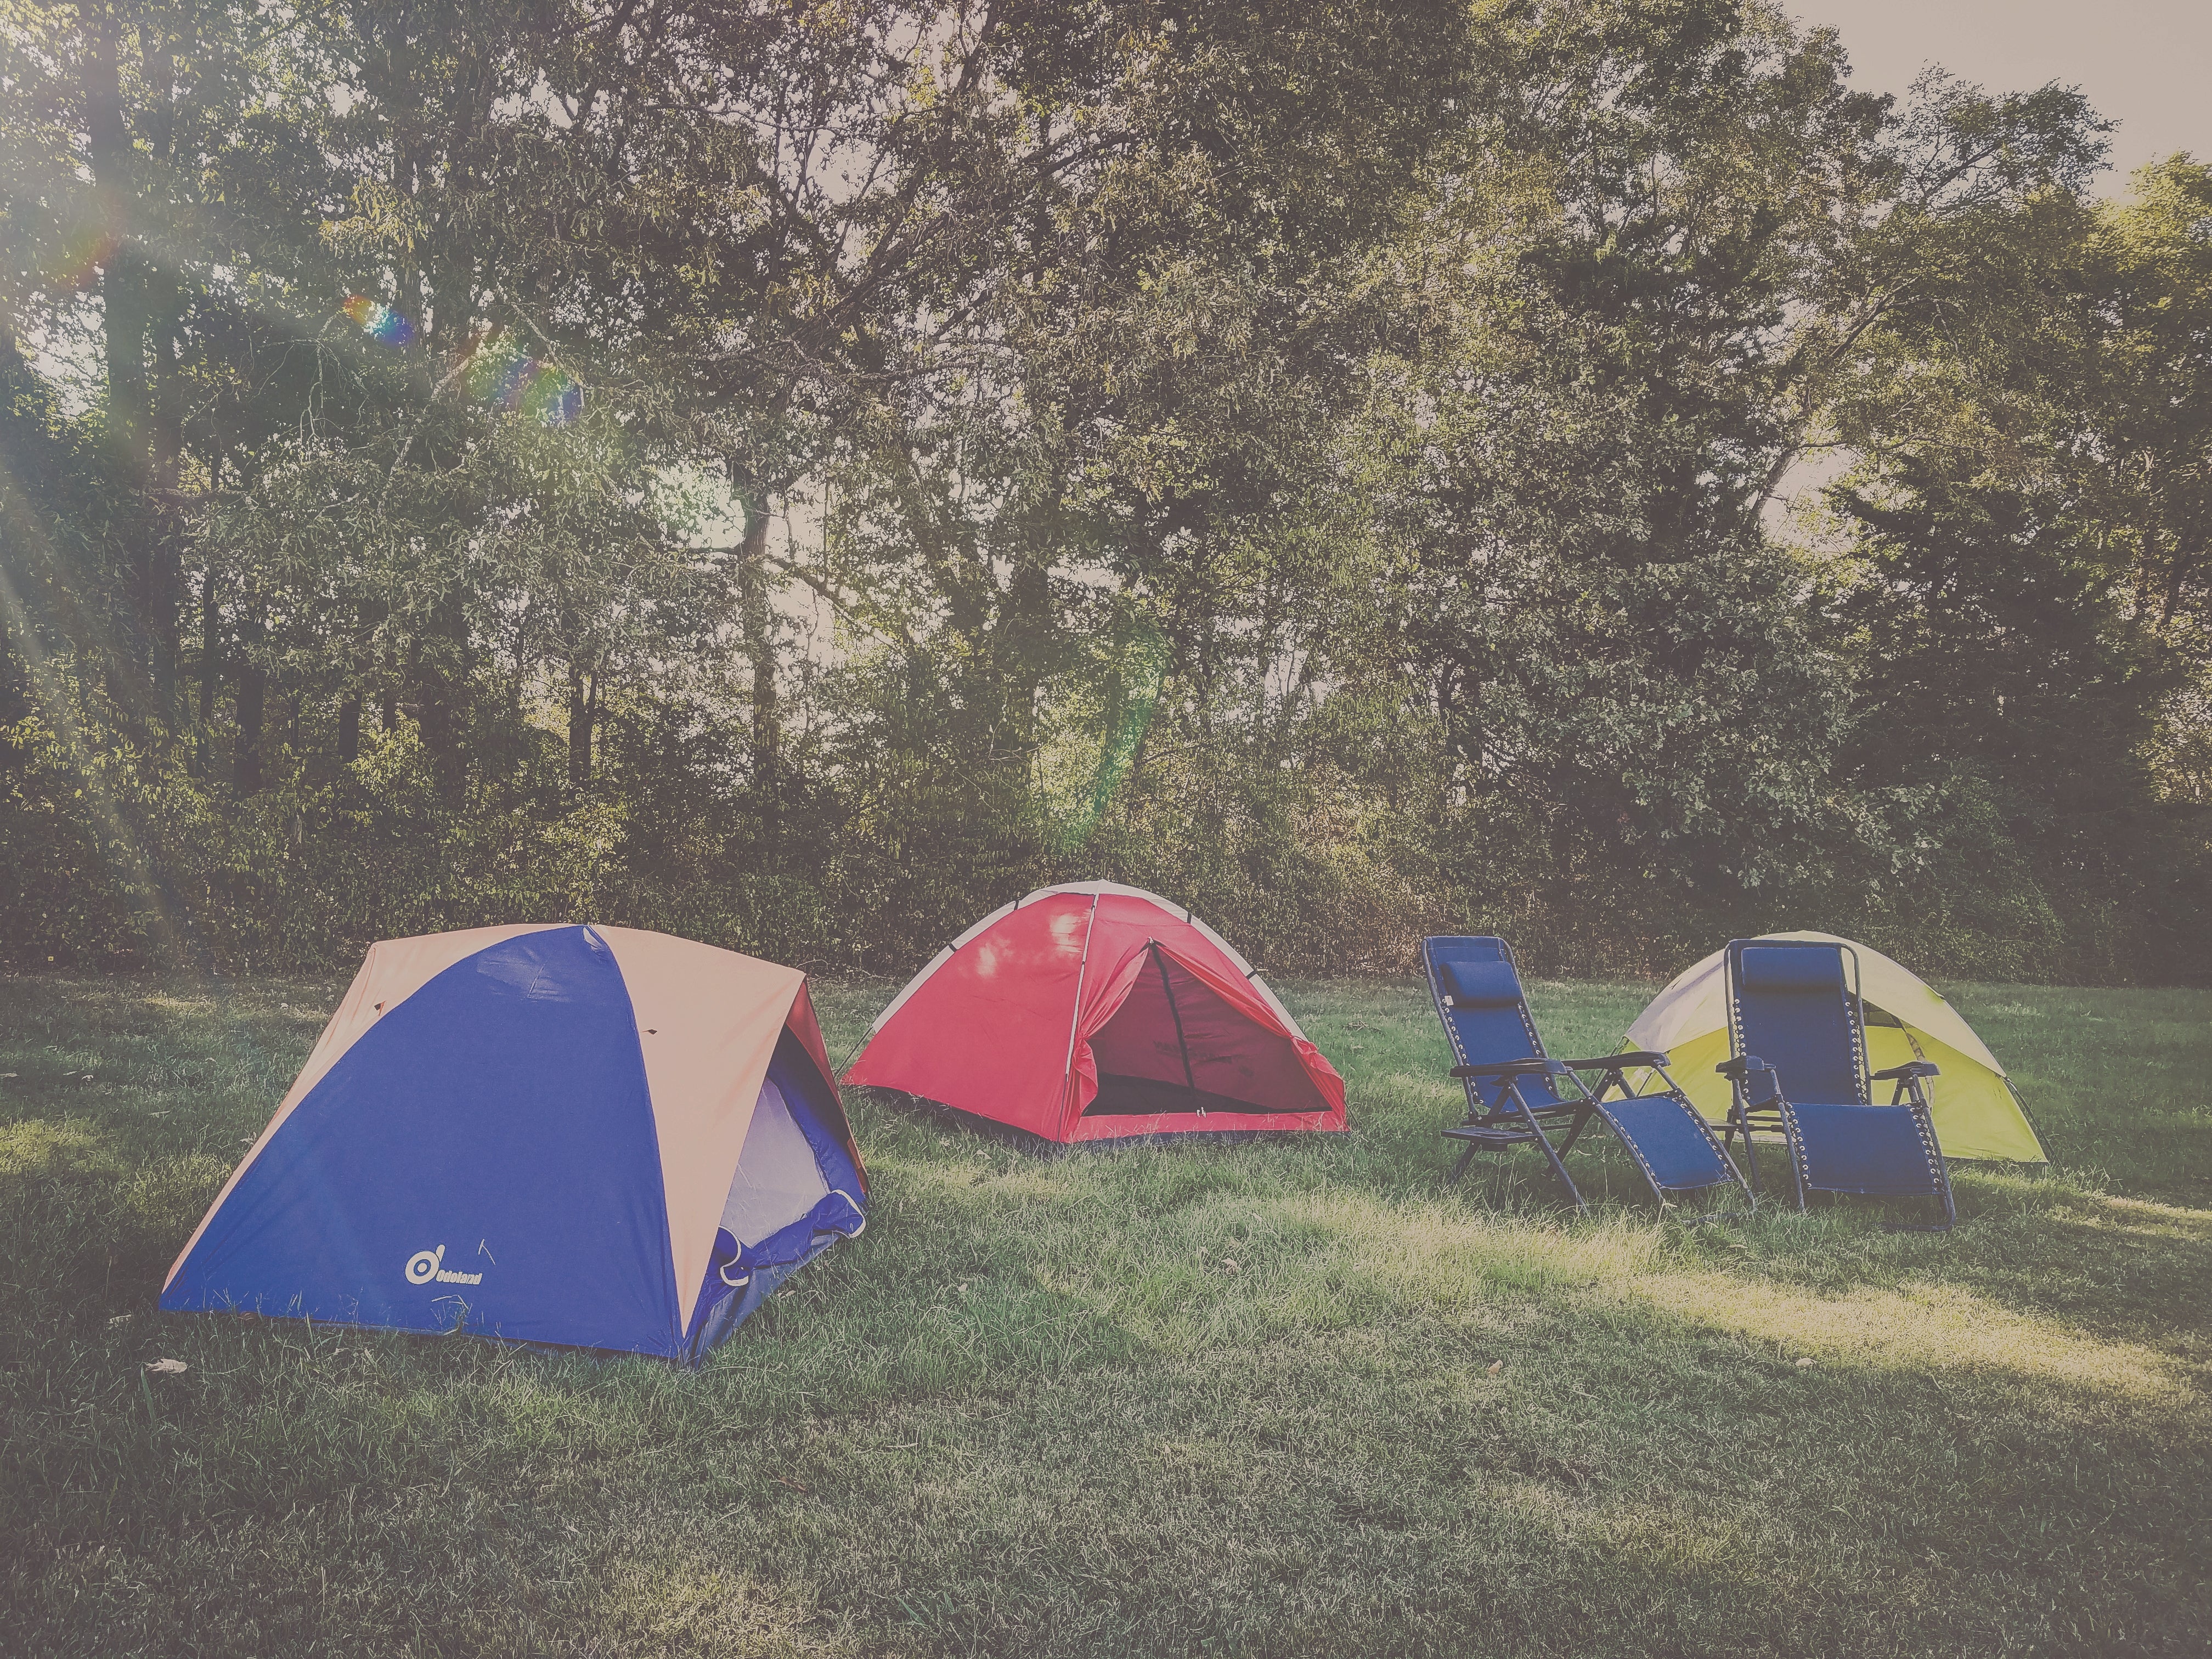 Campsites are located in a tree-lined open field with access to restroom and shower facilities, potable water, and an electric plug for cell phone charging.